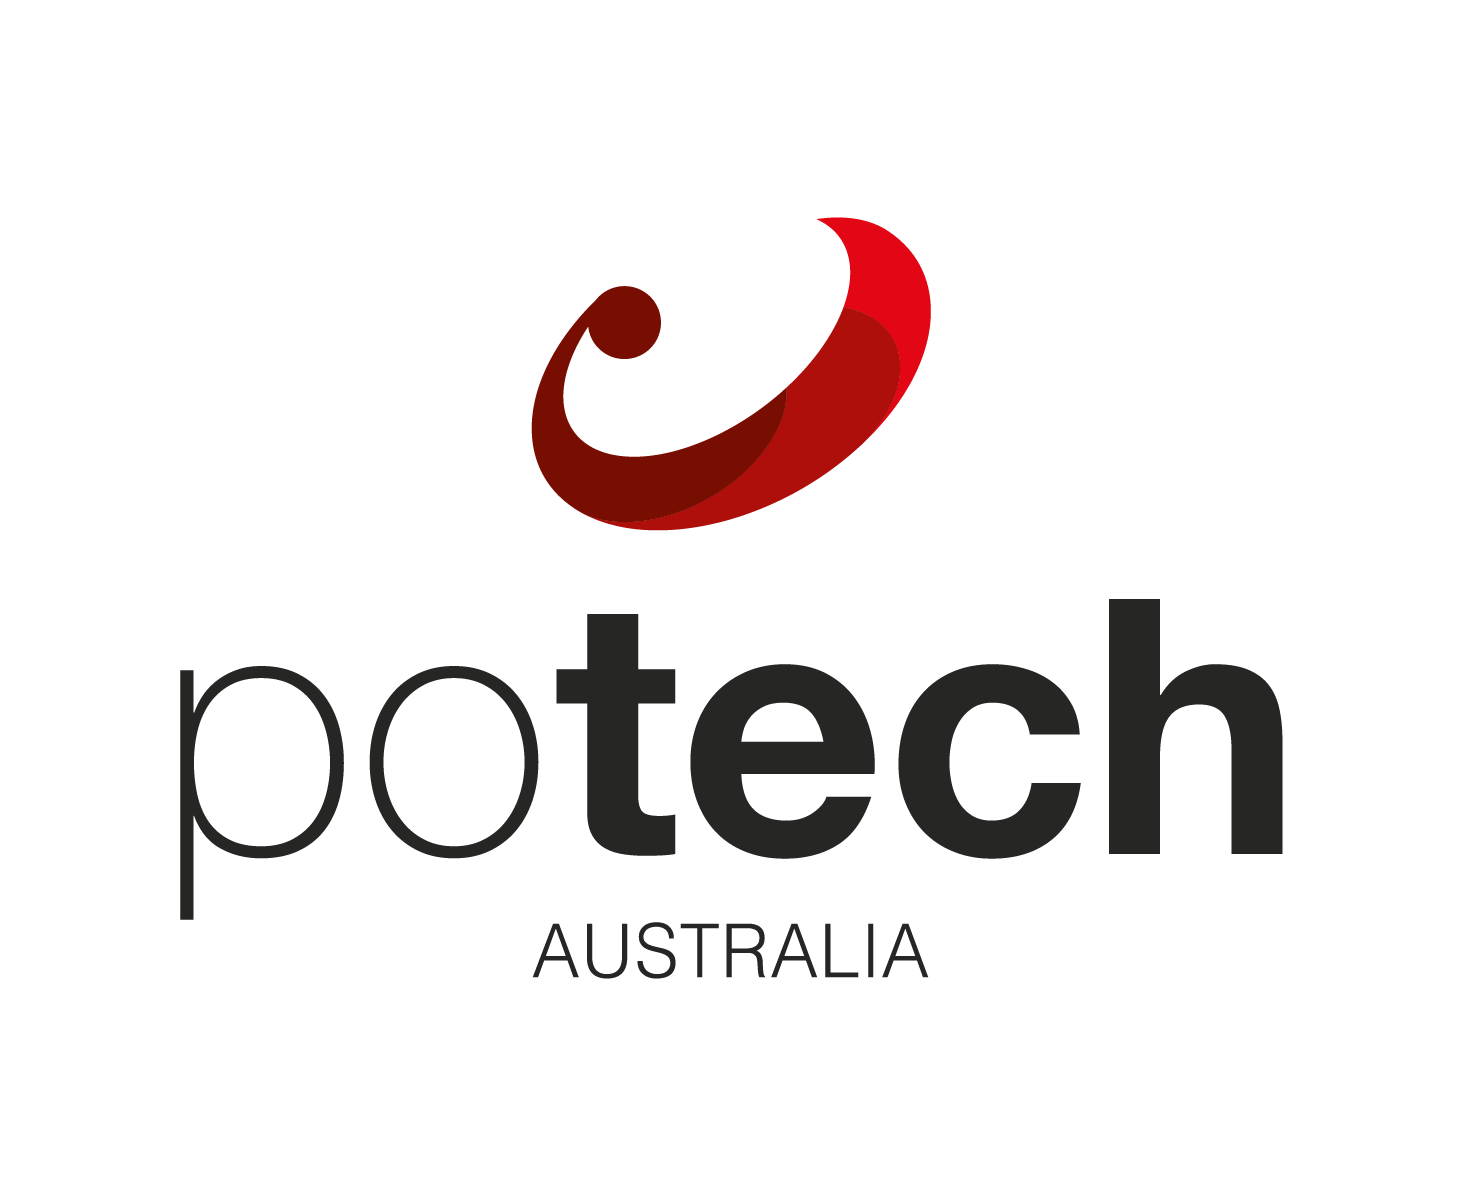 Potech Australia logo, cyber security software for dark web and AI / ML based threat detection.